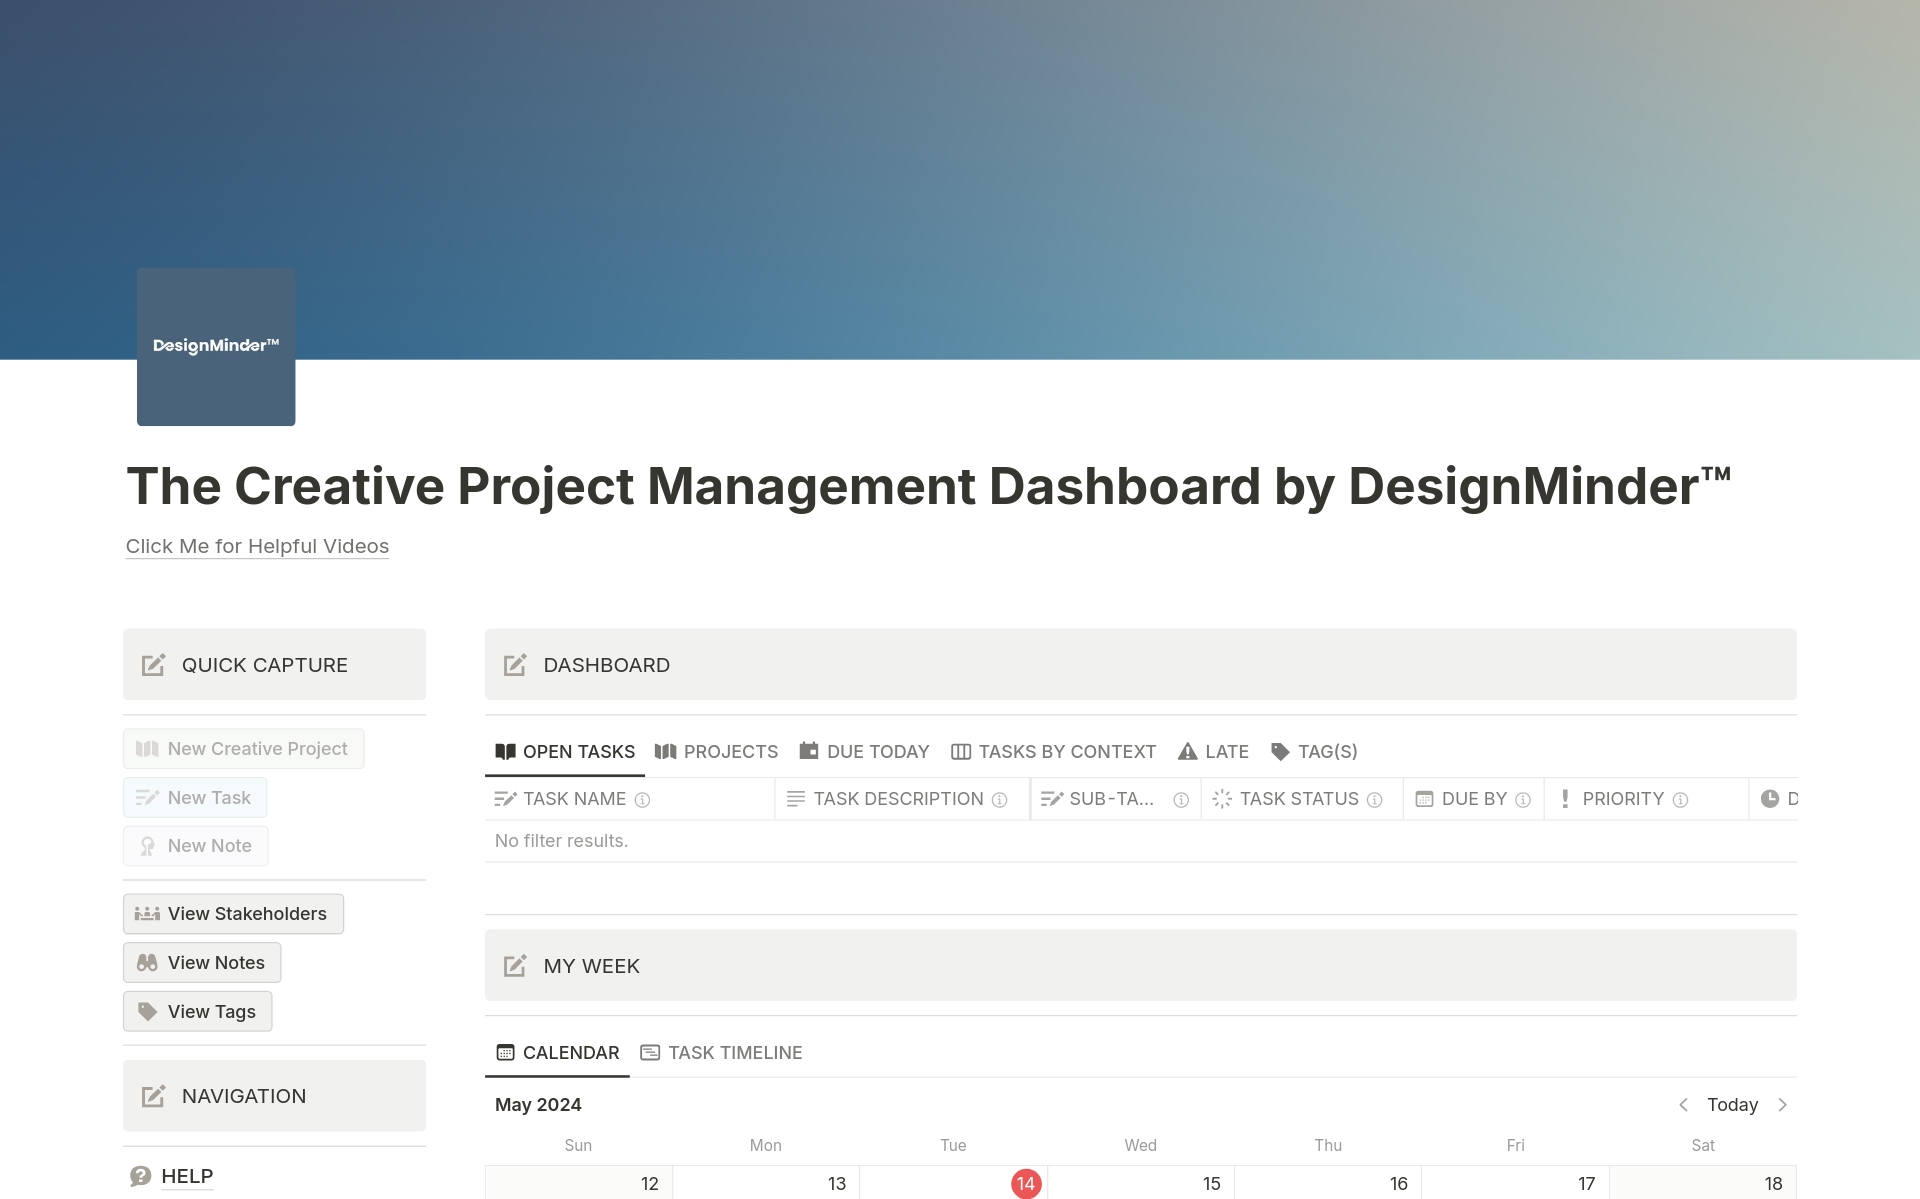 Transform your creative workflow with DesignMinder™ and see the difference in your organization, creativity, and focus today! Our dashboard blends traditional task management methodologies with Notion's flexibility to adapt to the unique demands of the creative industry.